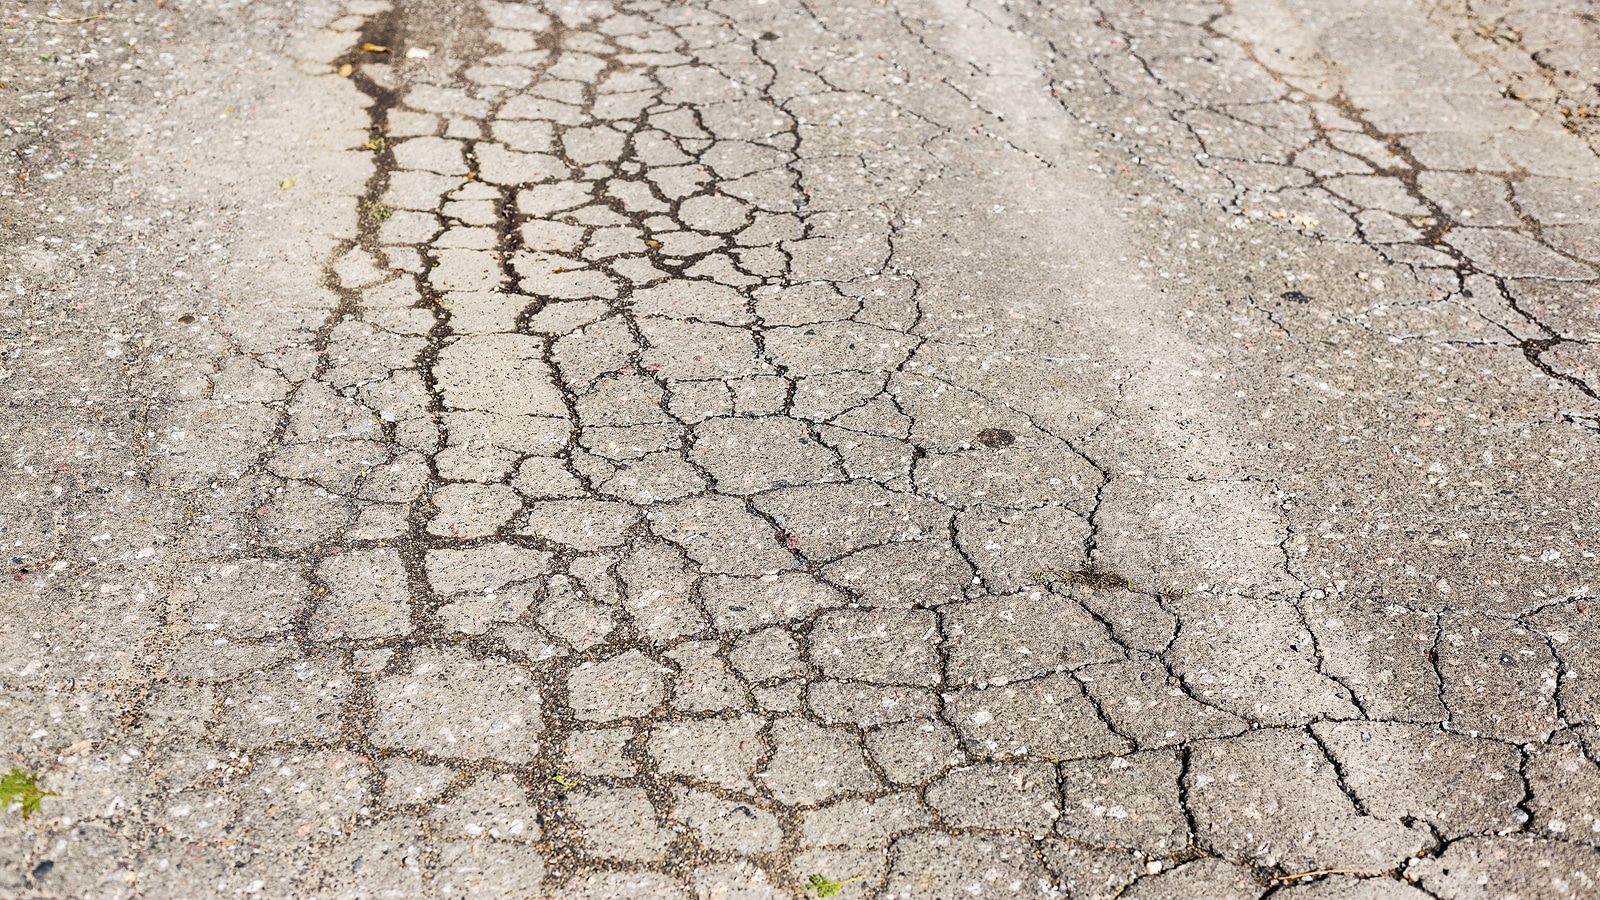 Indianapolis road defects and road hazard lawyer